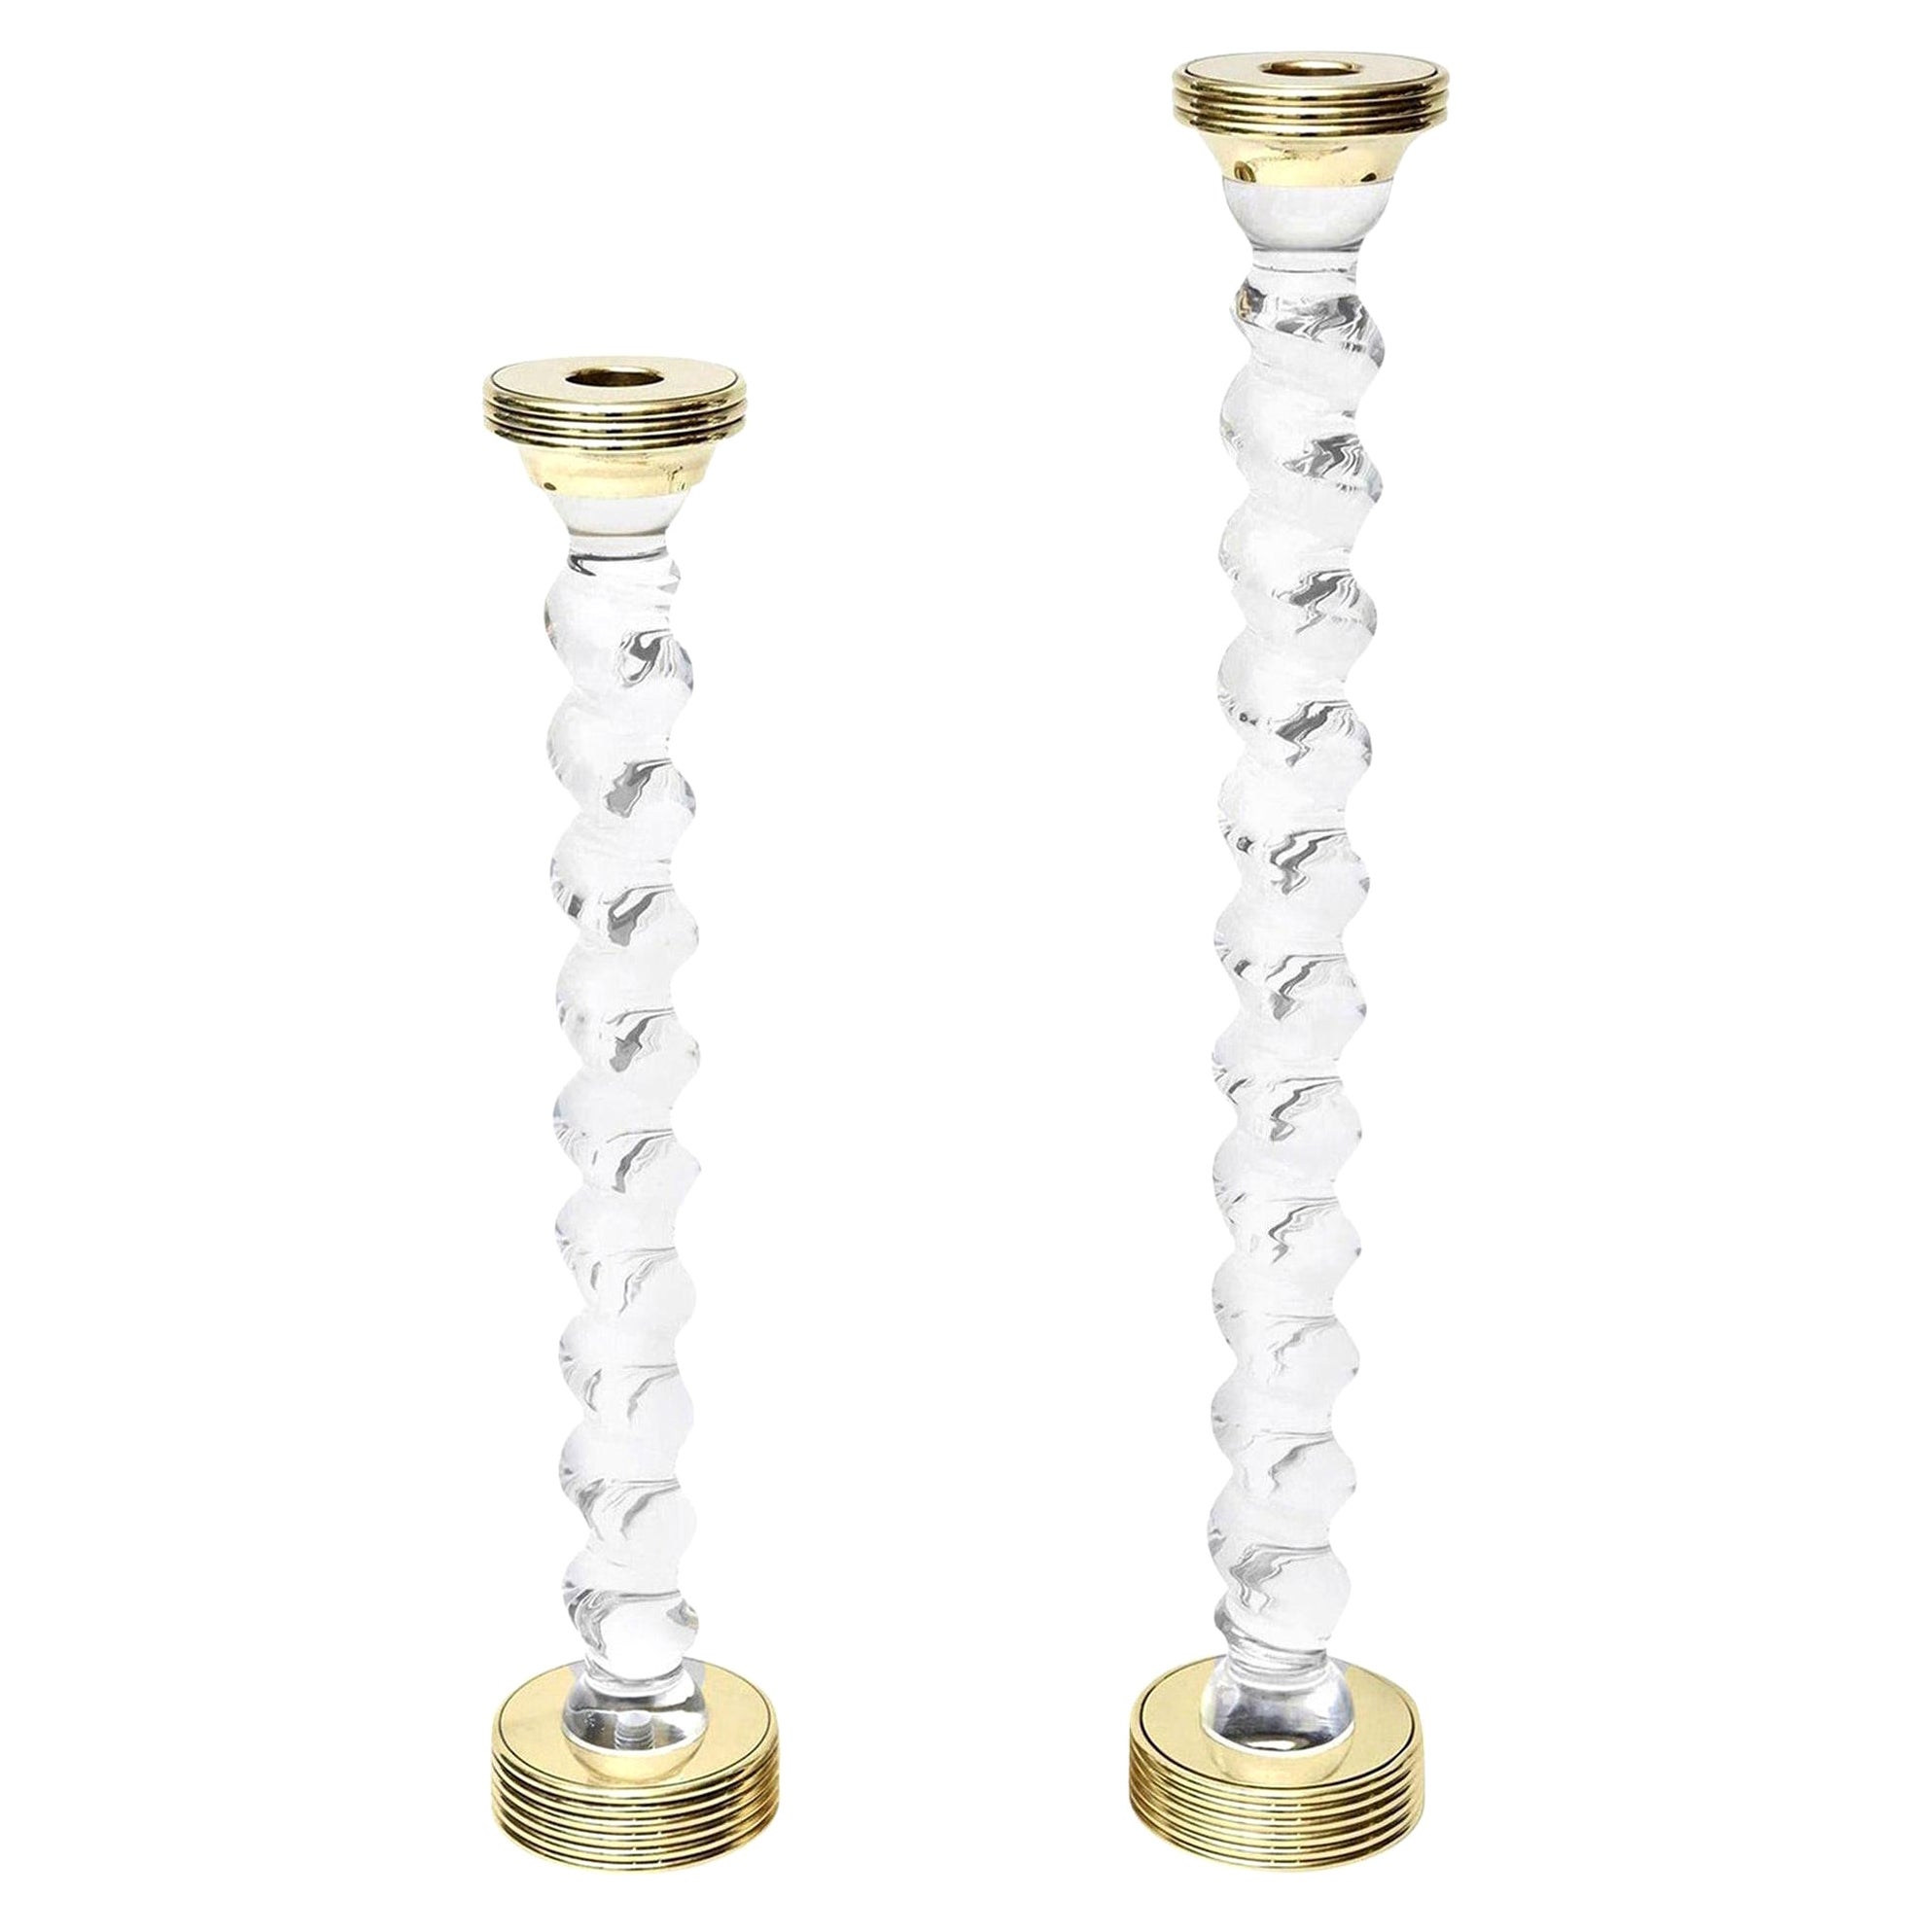  Brass and Twisted Rare Lucite Monumental Candlesticks Pair of Vintage For Sale